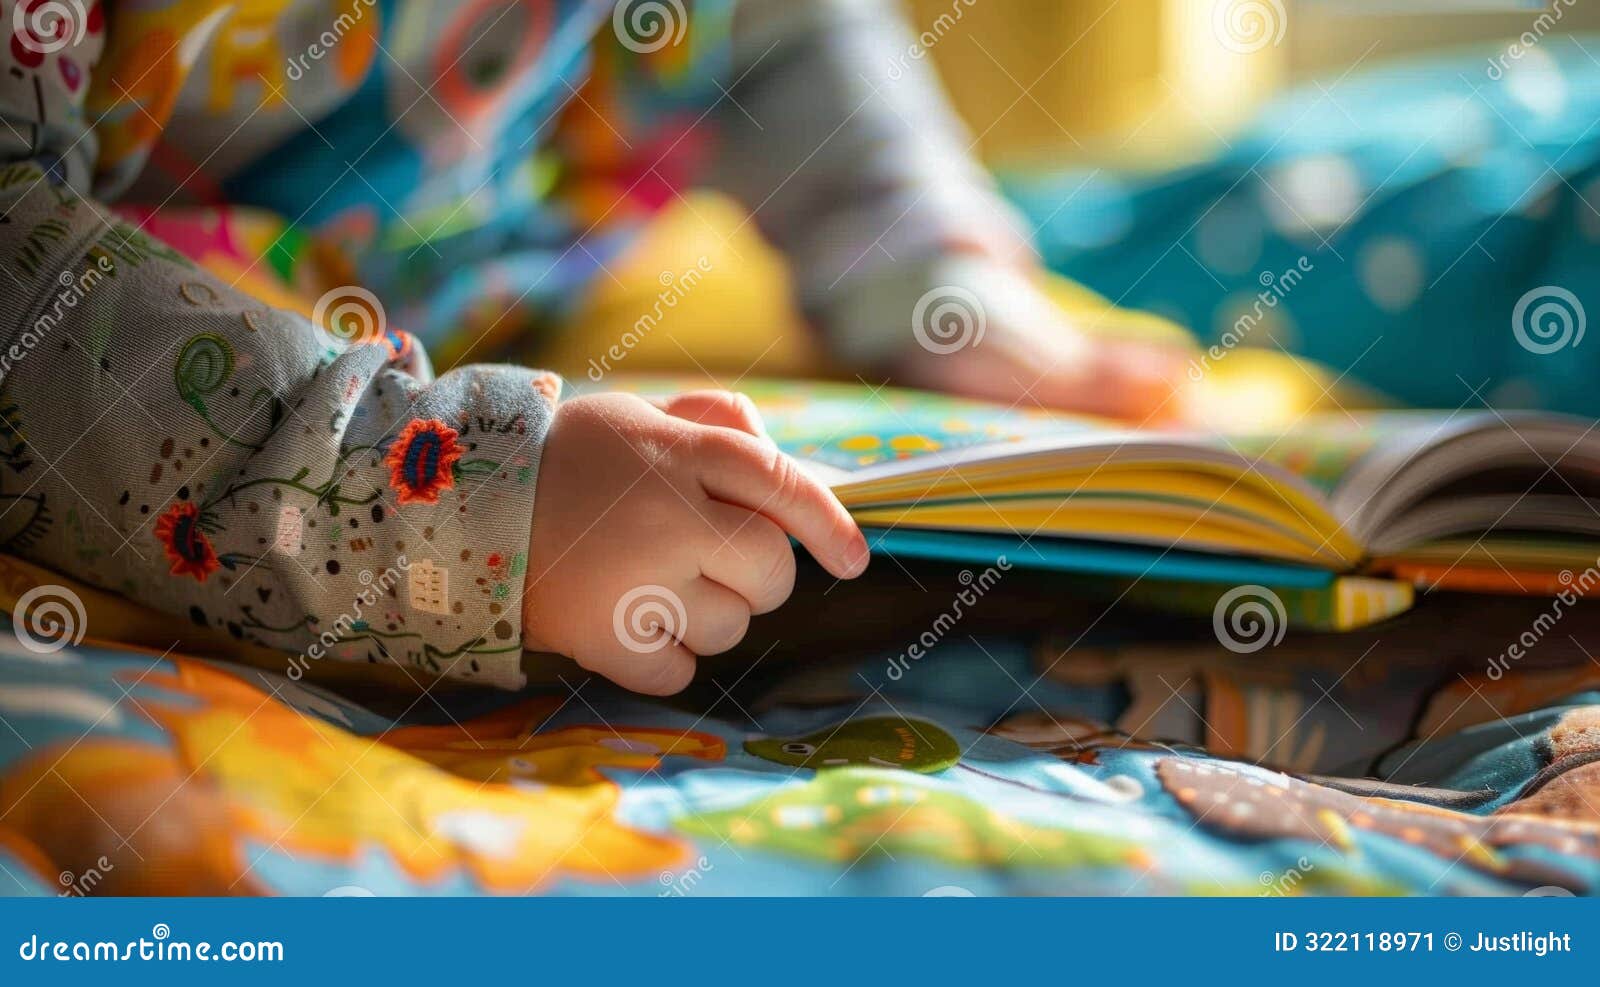 a hand holding an interactive storybook that incorporates sensory s such as textured pages and scents to